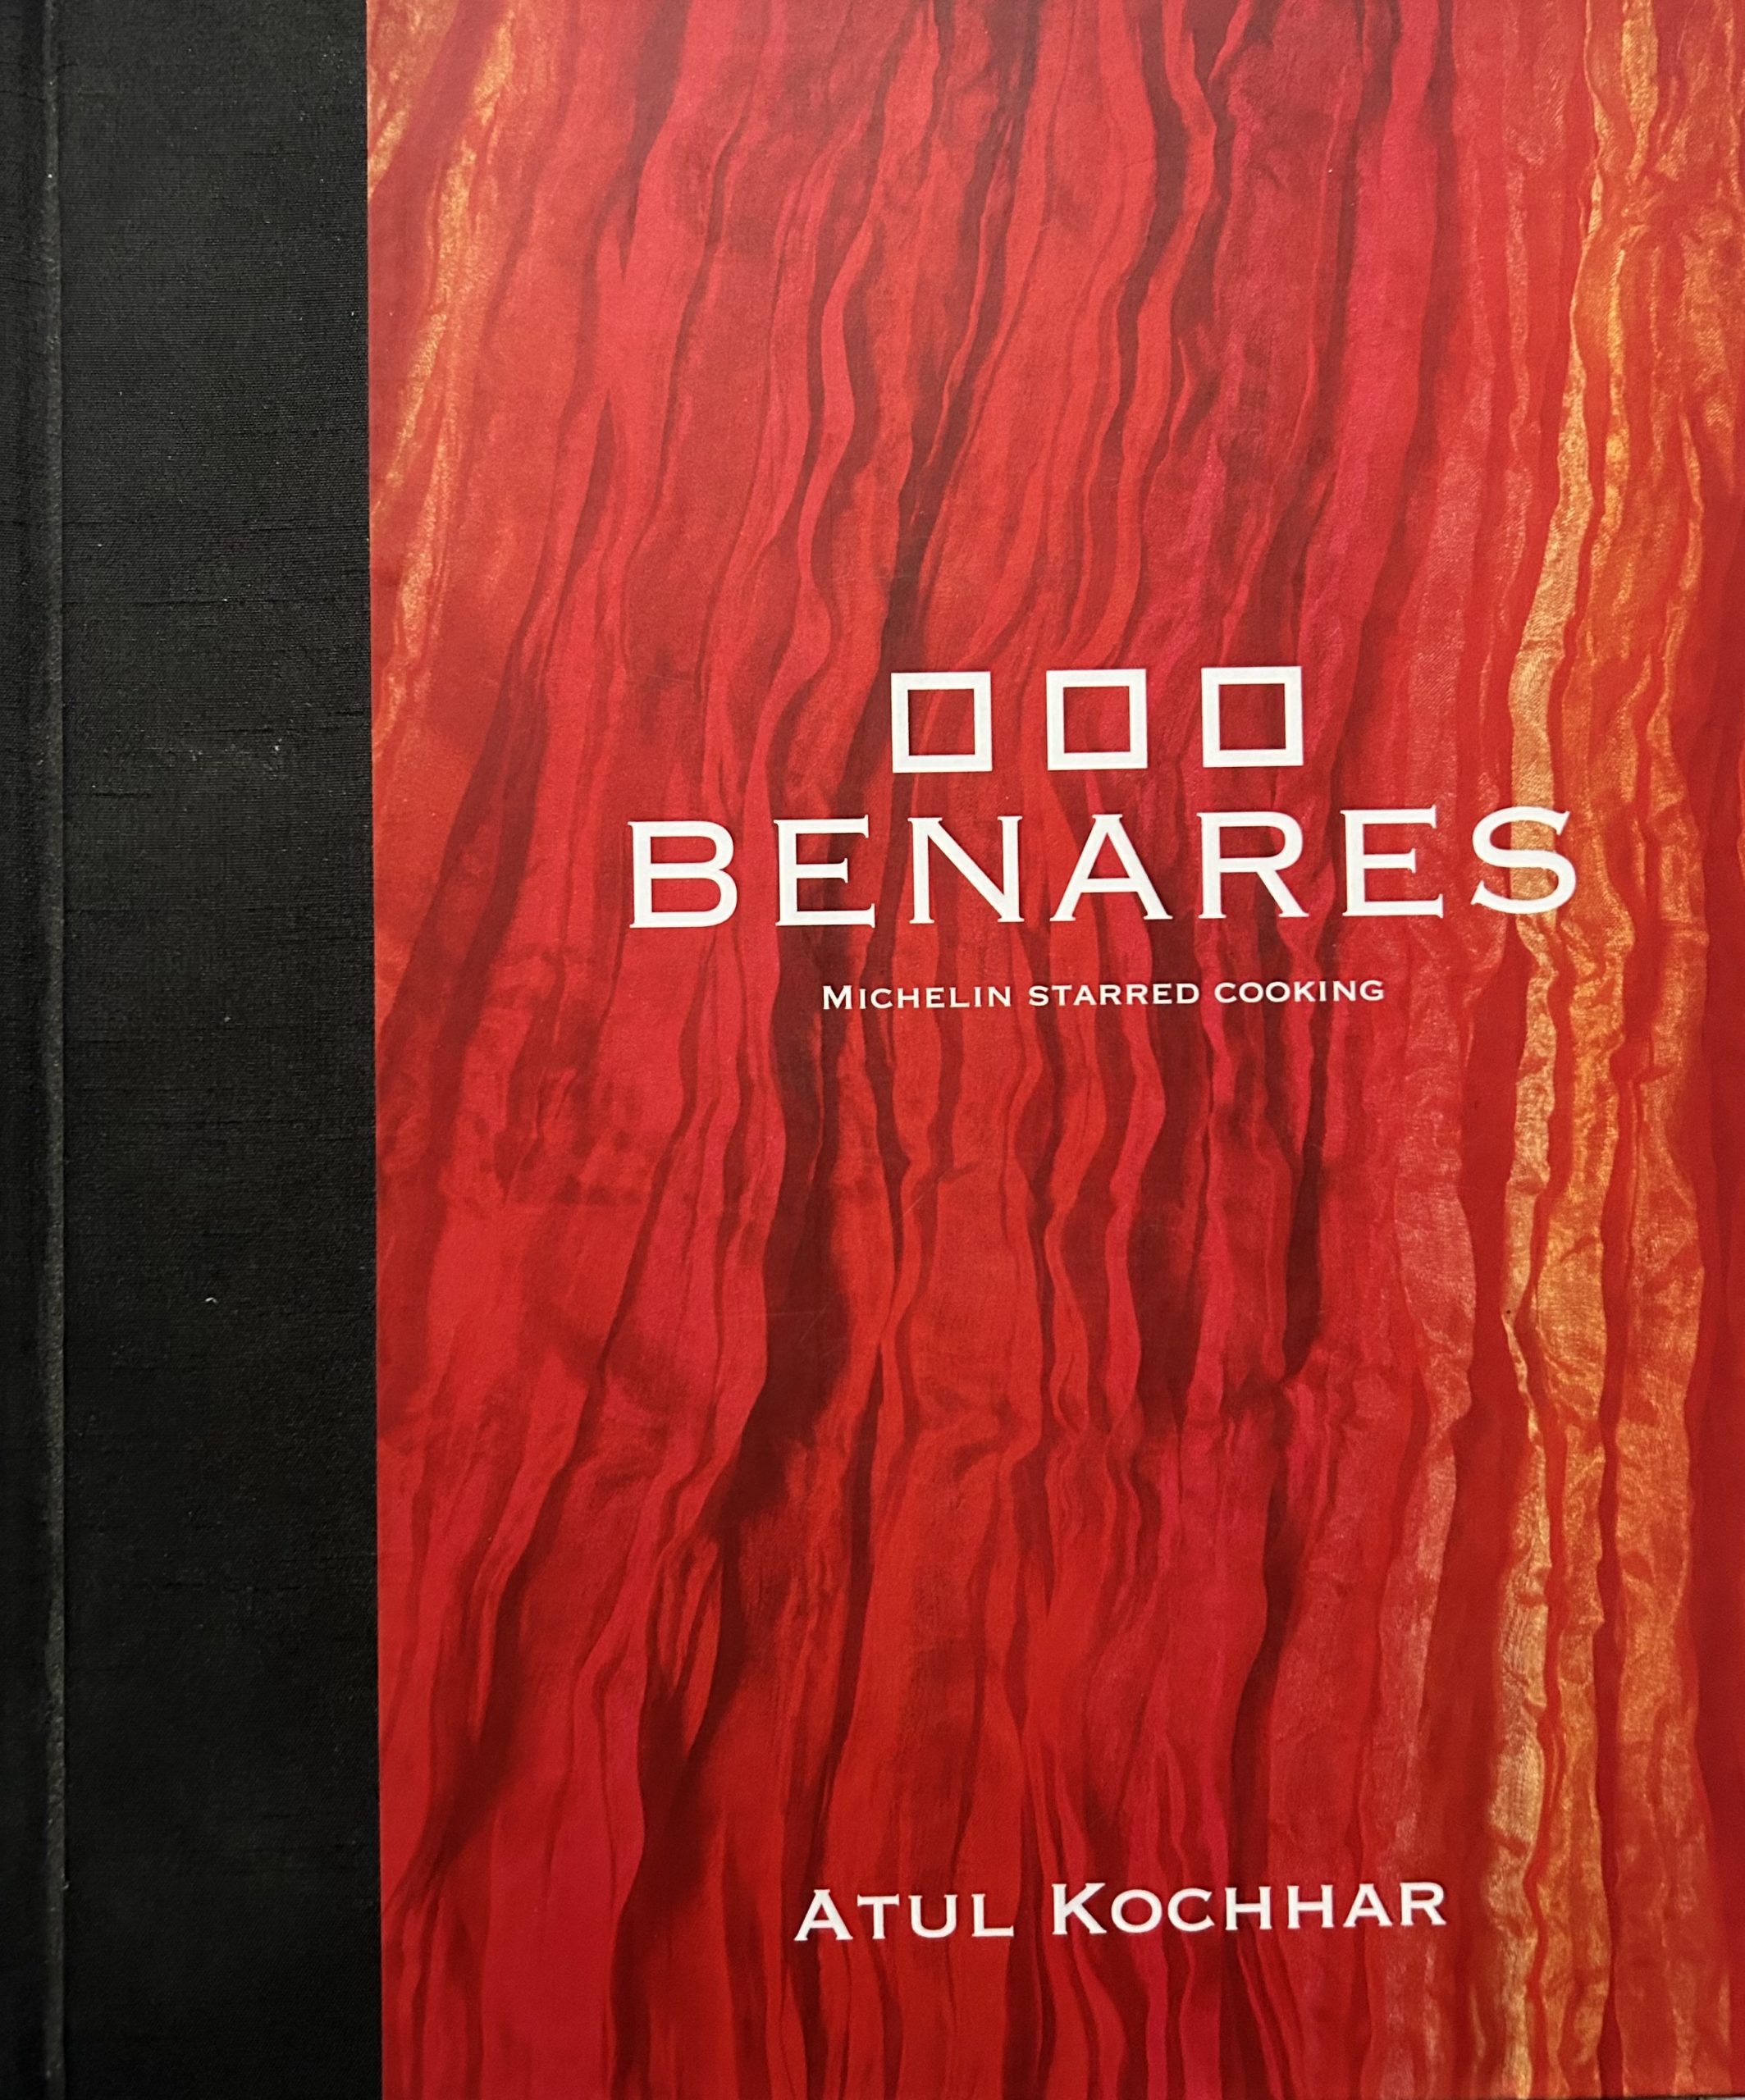 Benares: Michelin Starred Cooking by Atul Kochhar